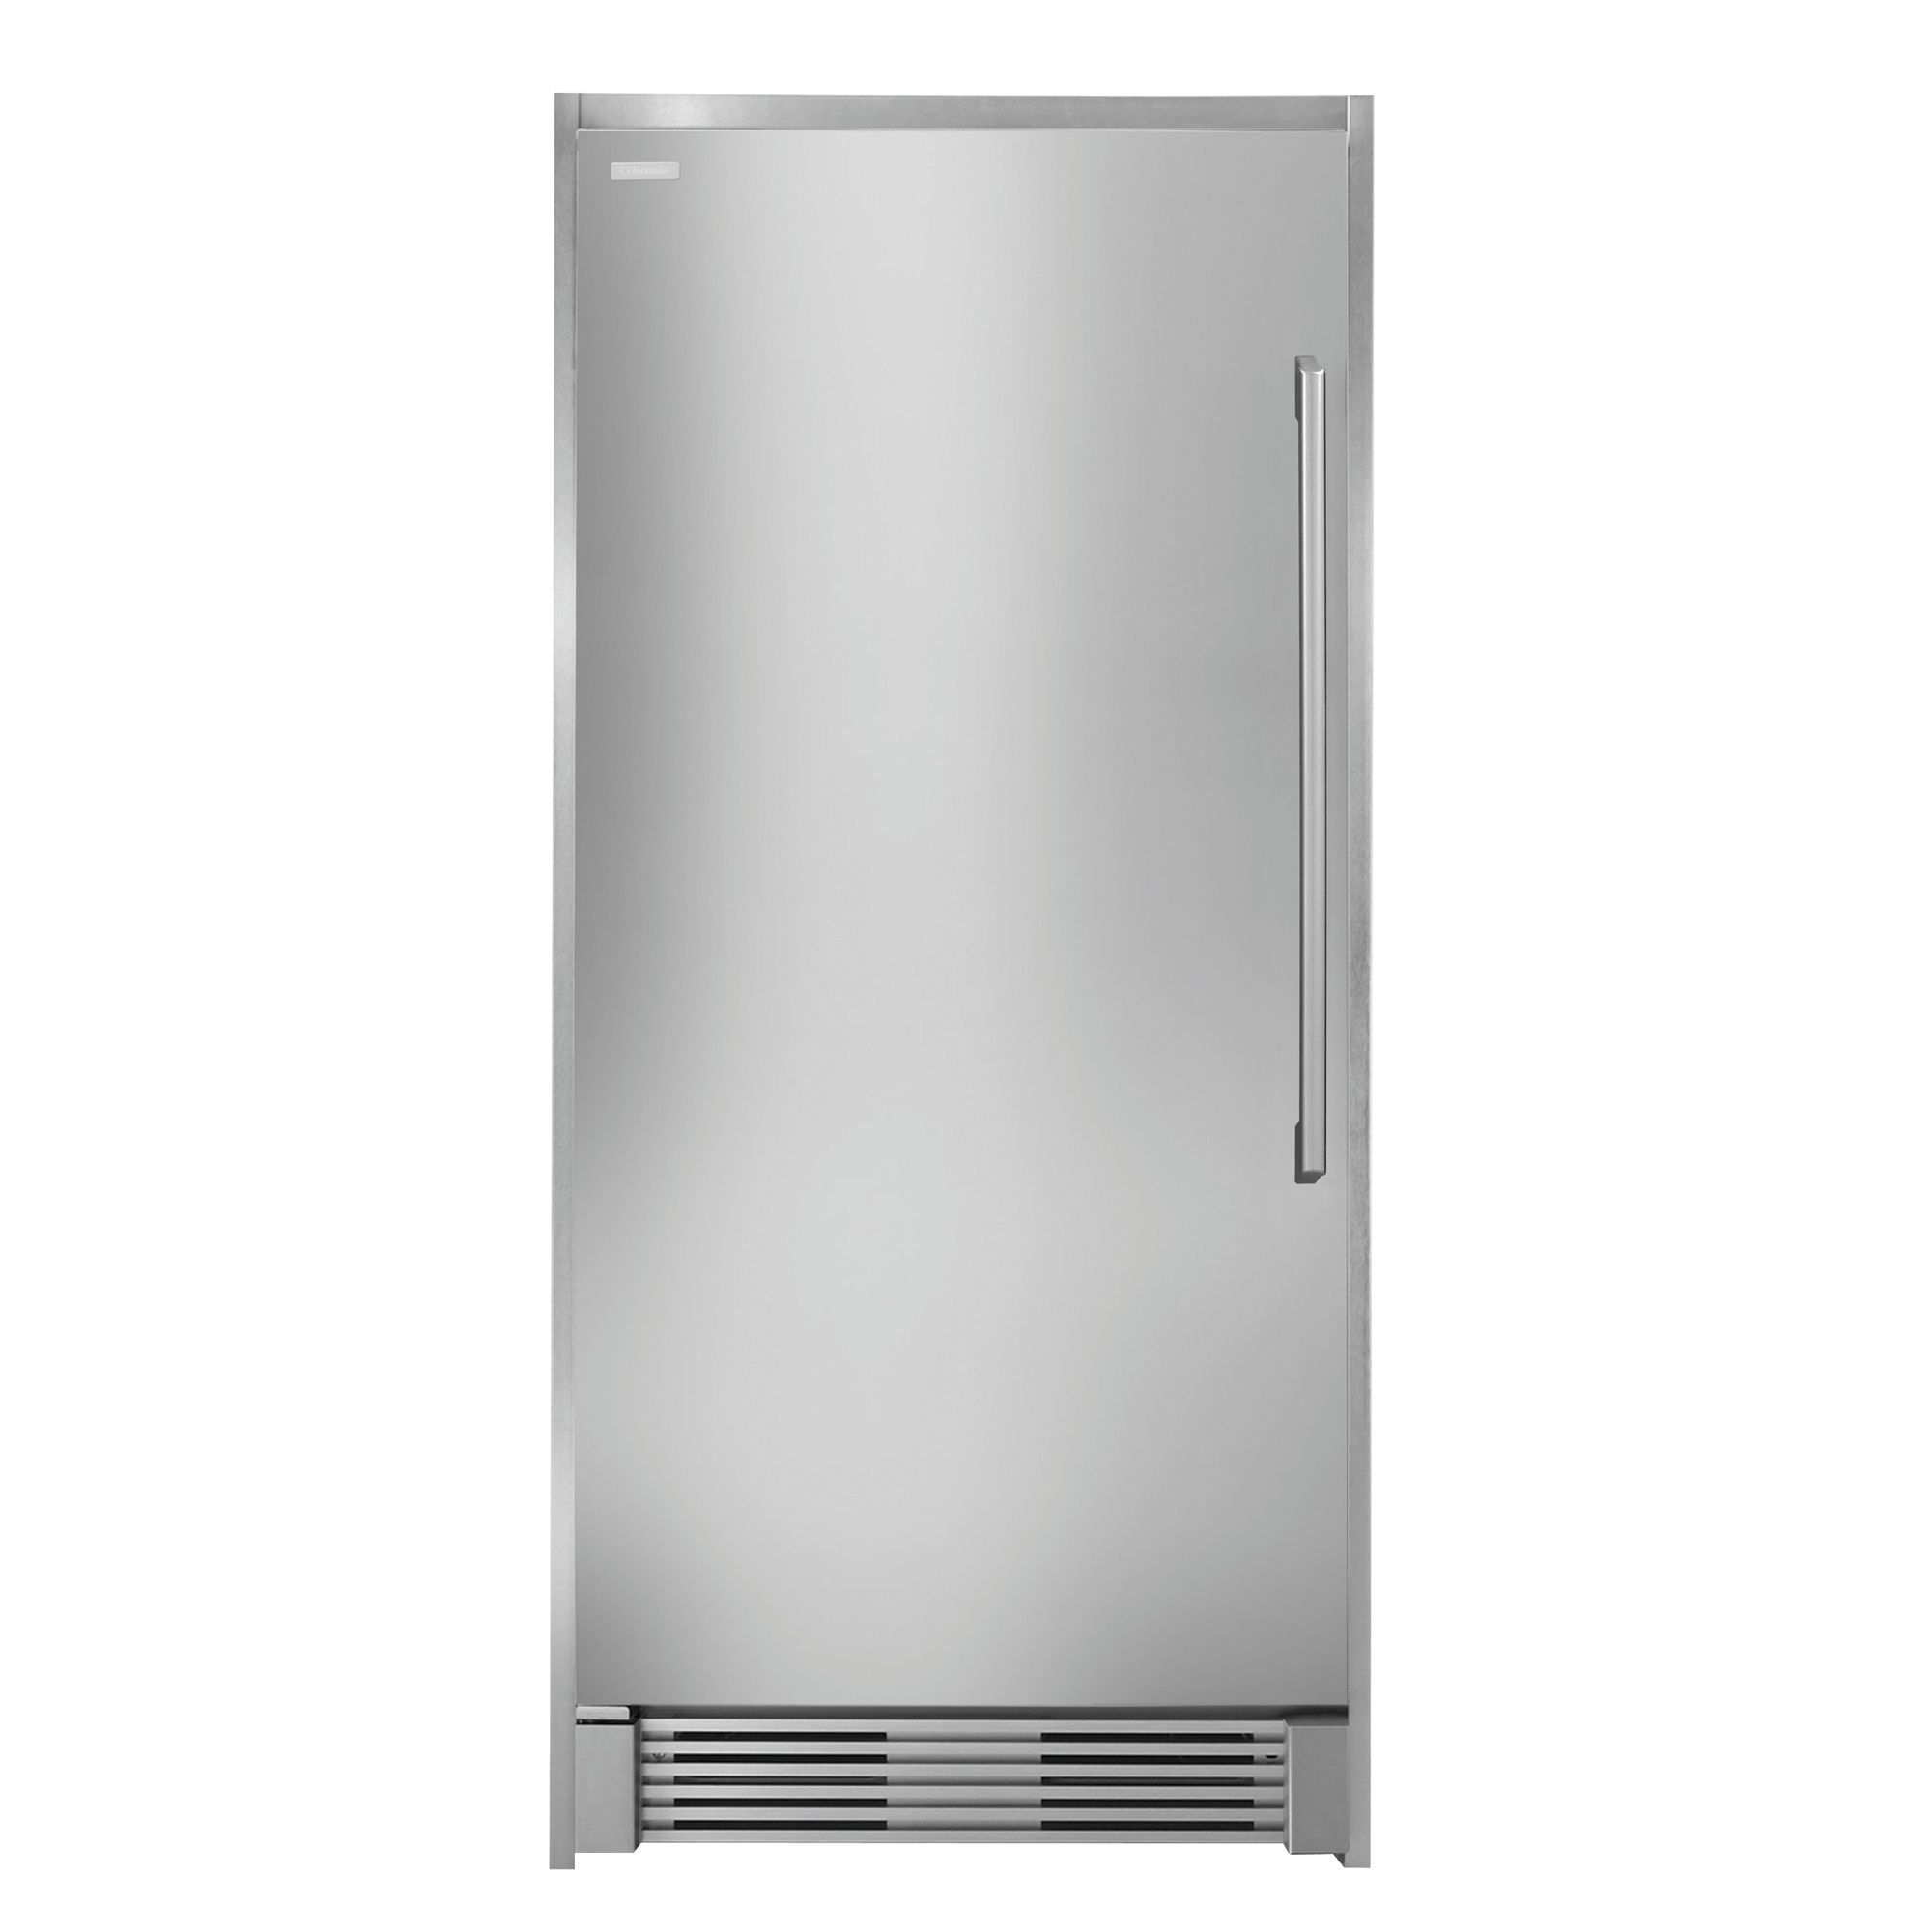 Electrolux 18.6 cu. ft. Built-In All Freezer - Stainless Steel